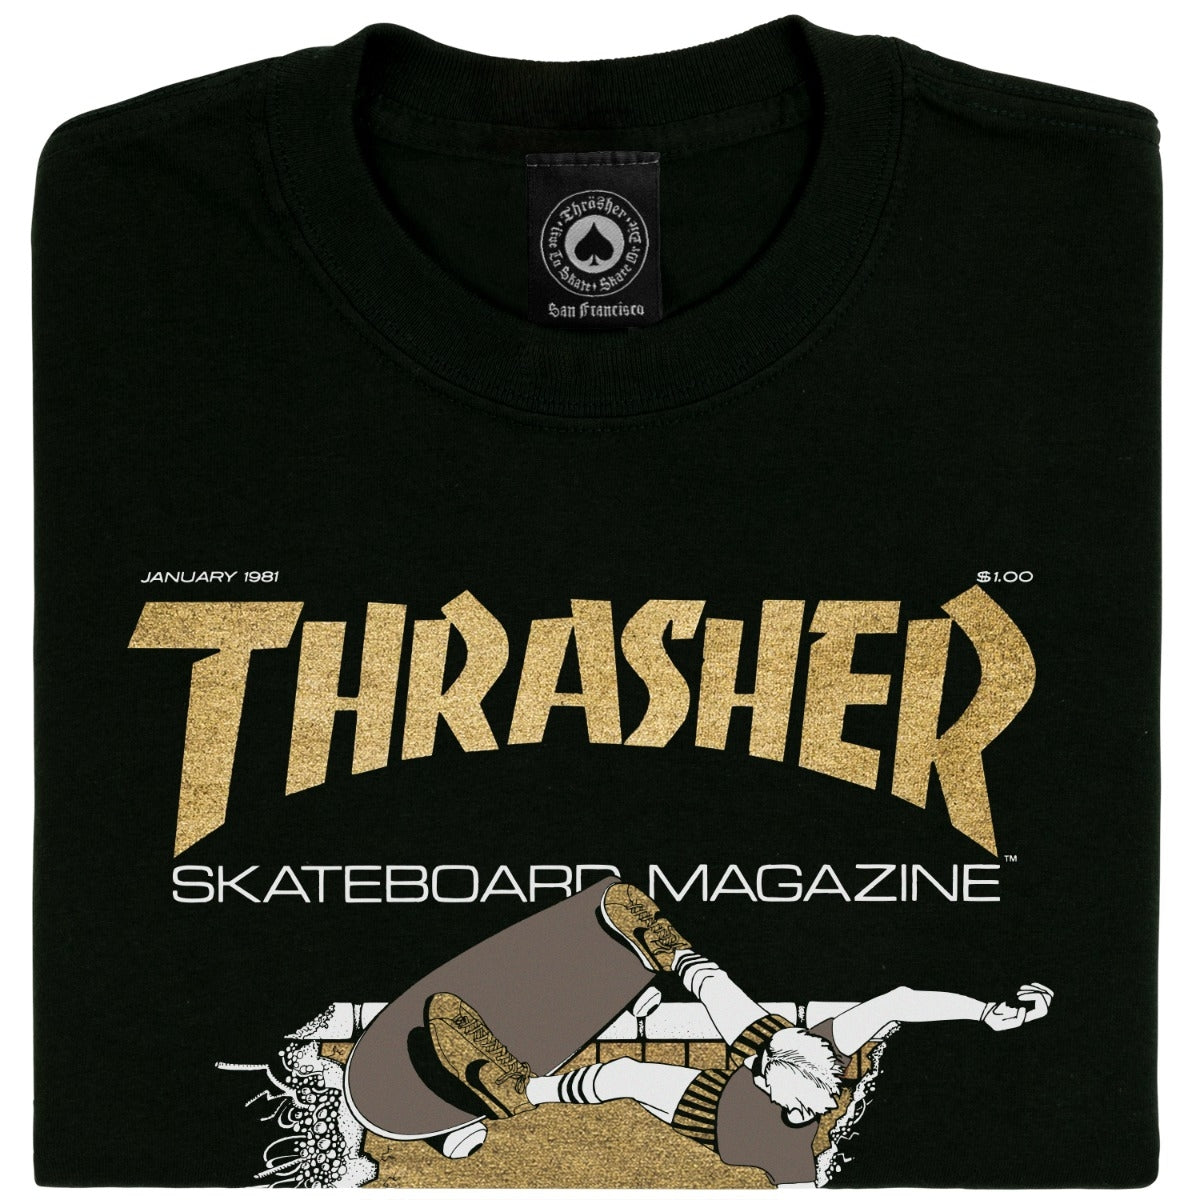 First Cover T-Shirt - Black/Gold